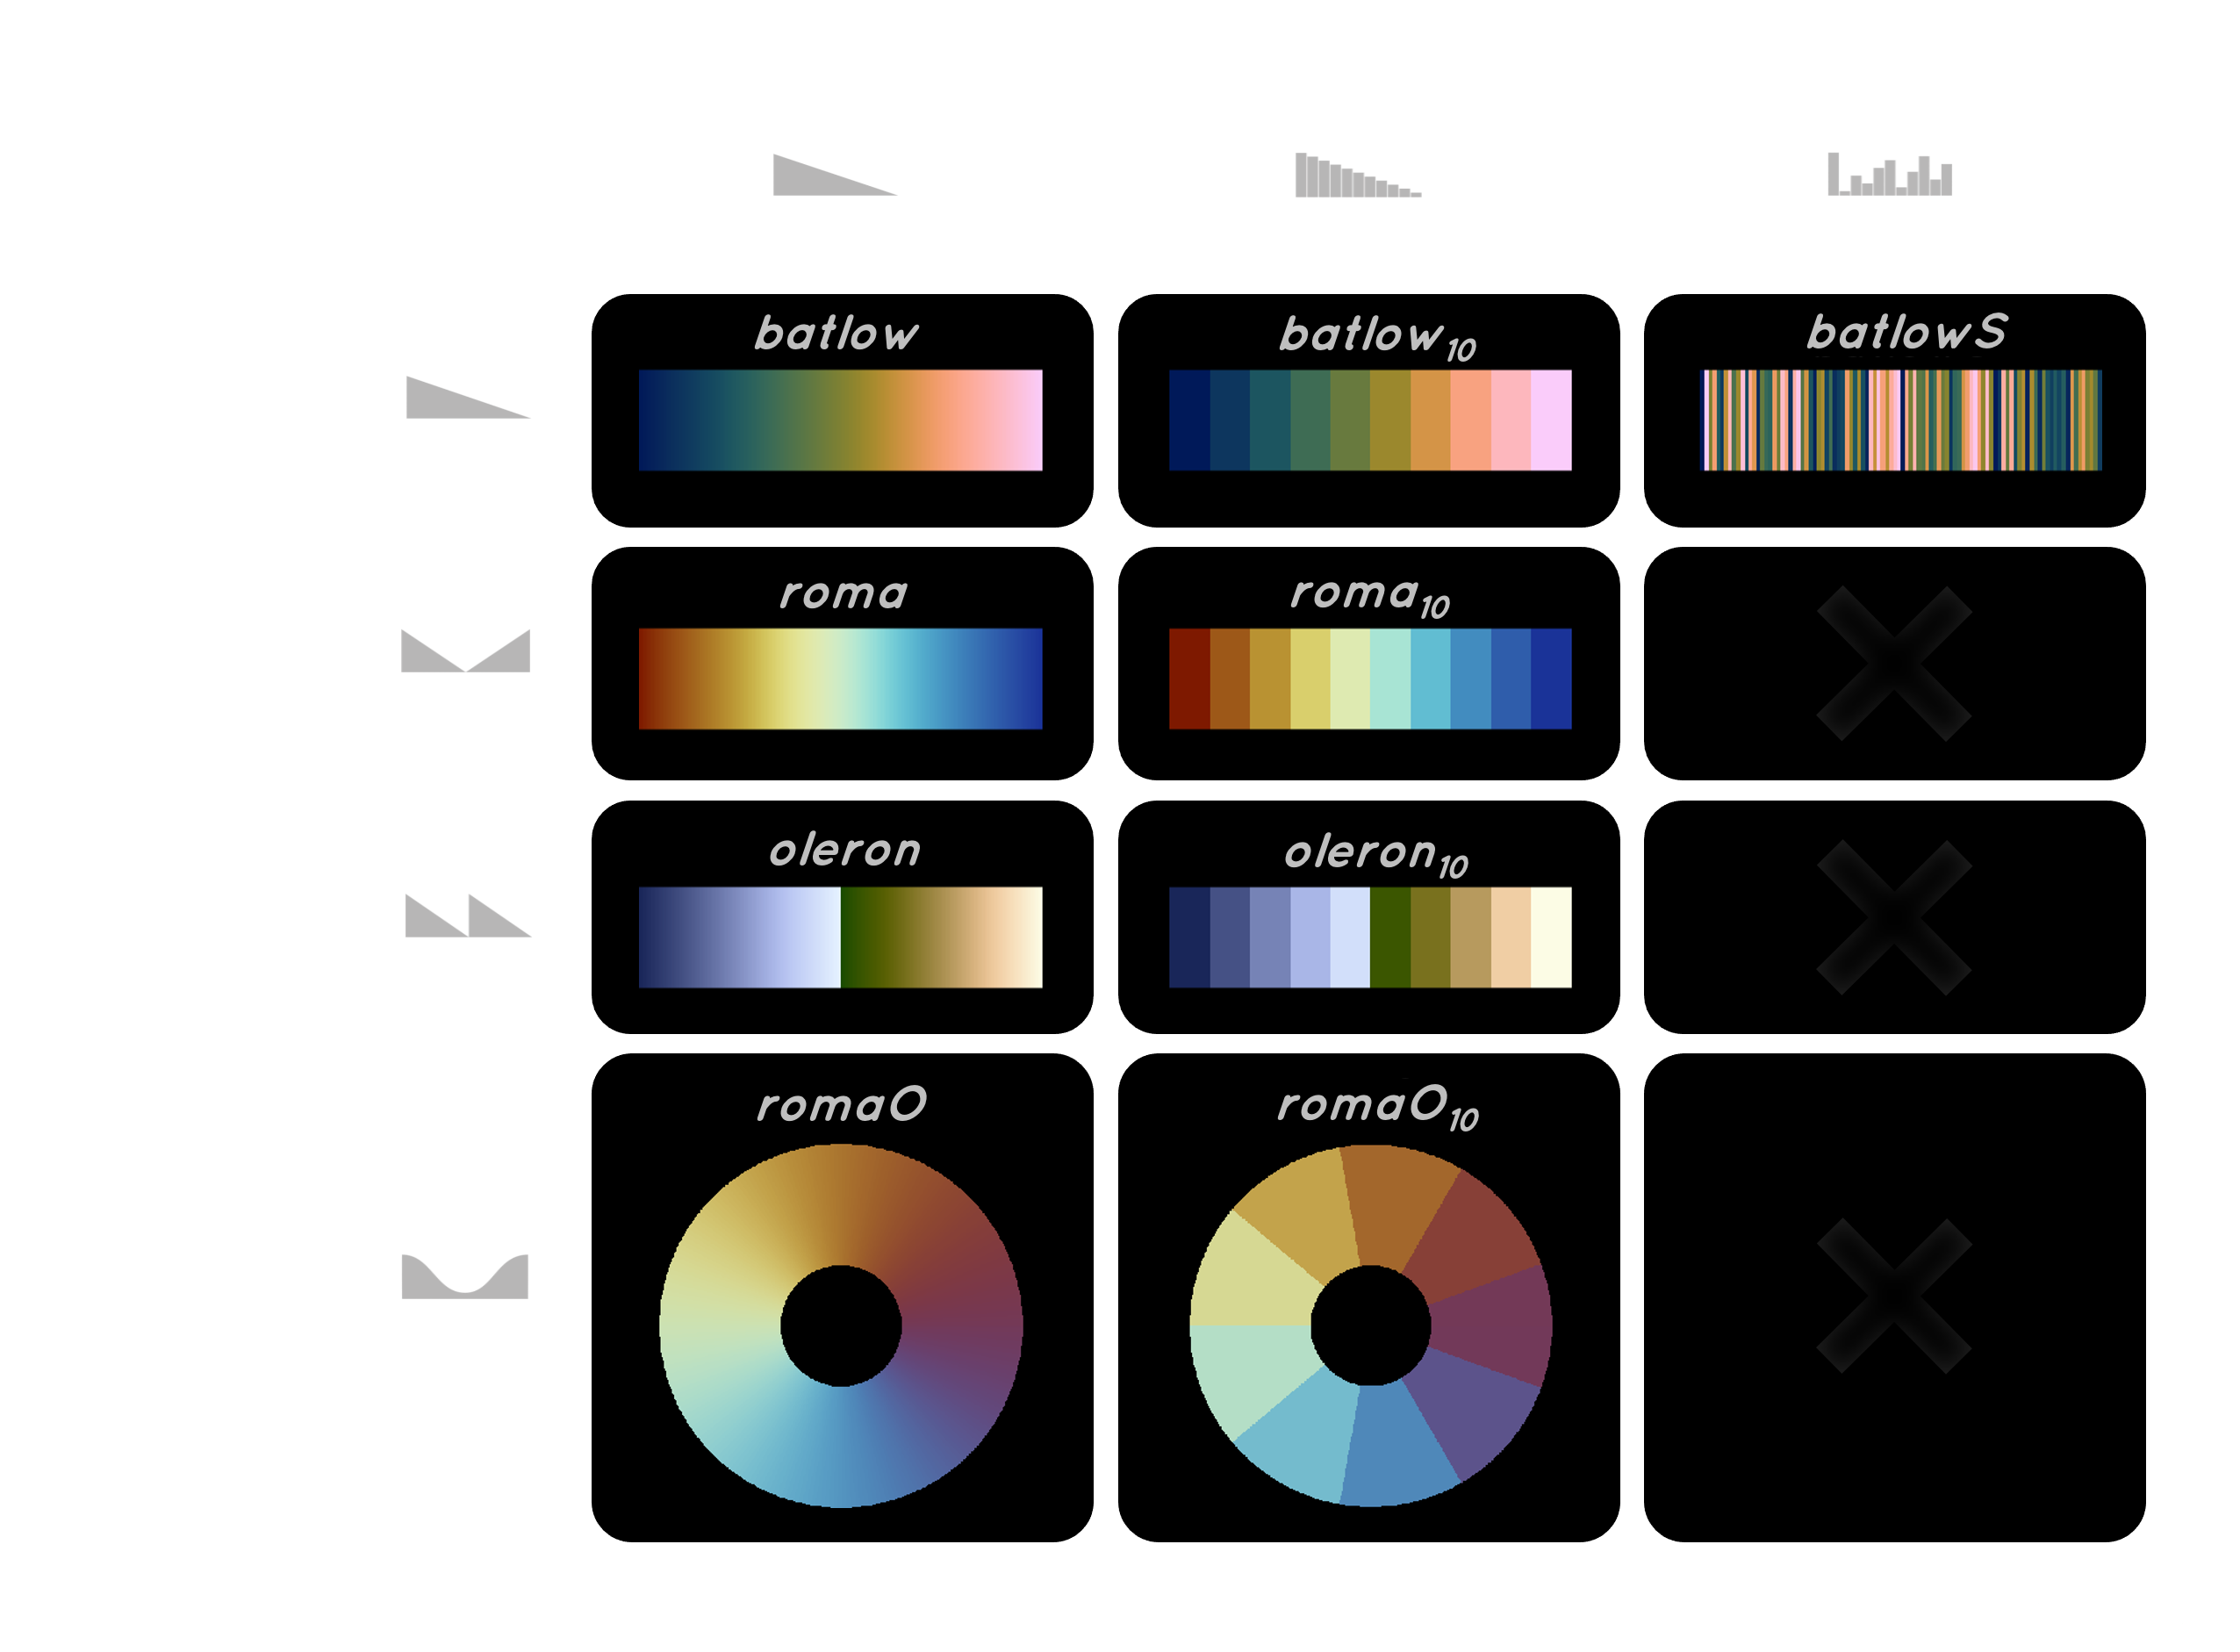 Types (Continuous; Discrete; Categorical) and classes (Sequential; Diverging; Multi-sequential; Cyclic) of colour maps.